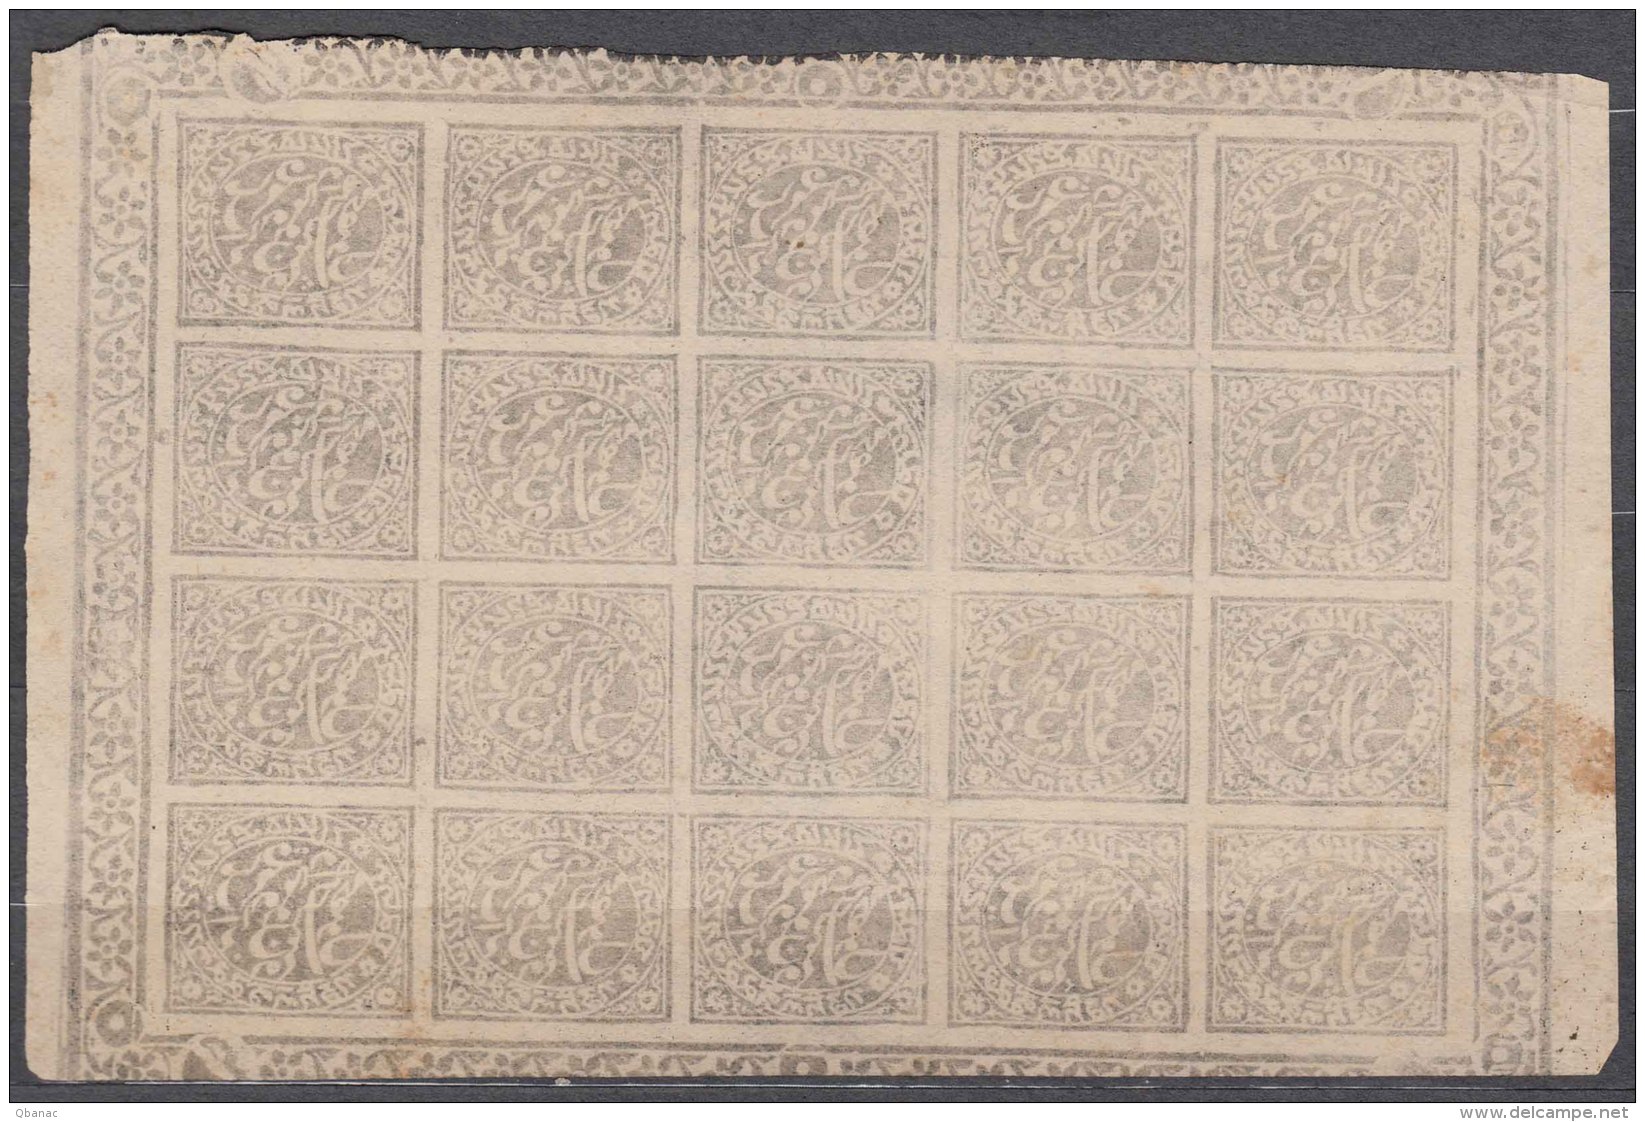 India States, Jammu And Kashmir, Complete Sheet With Margins - Jummo & Cachemire